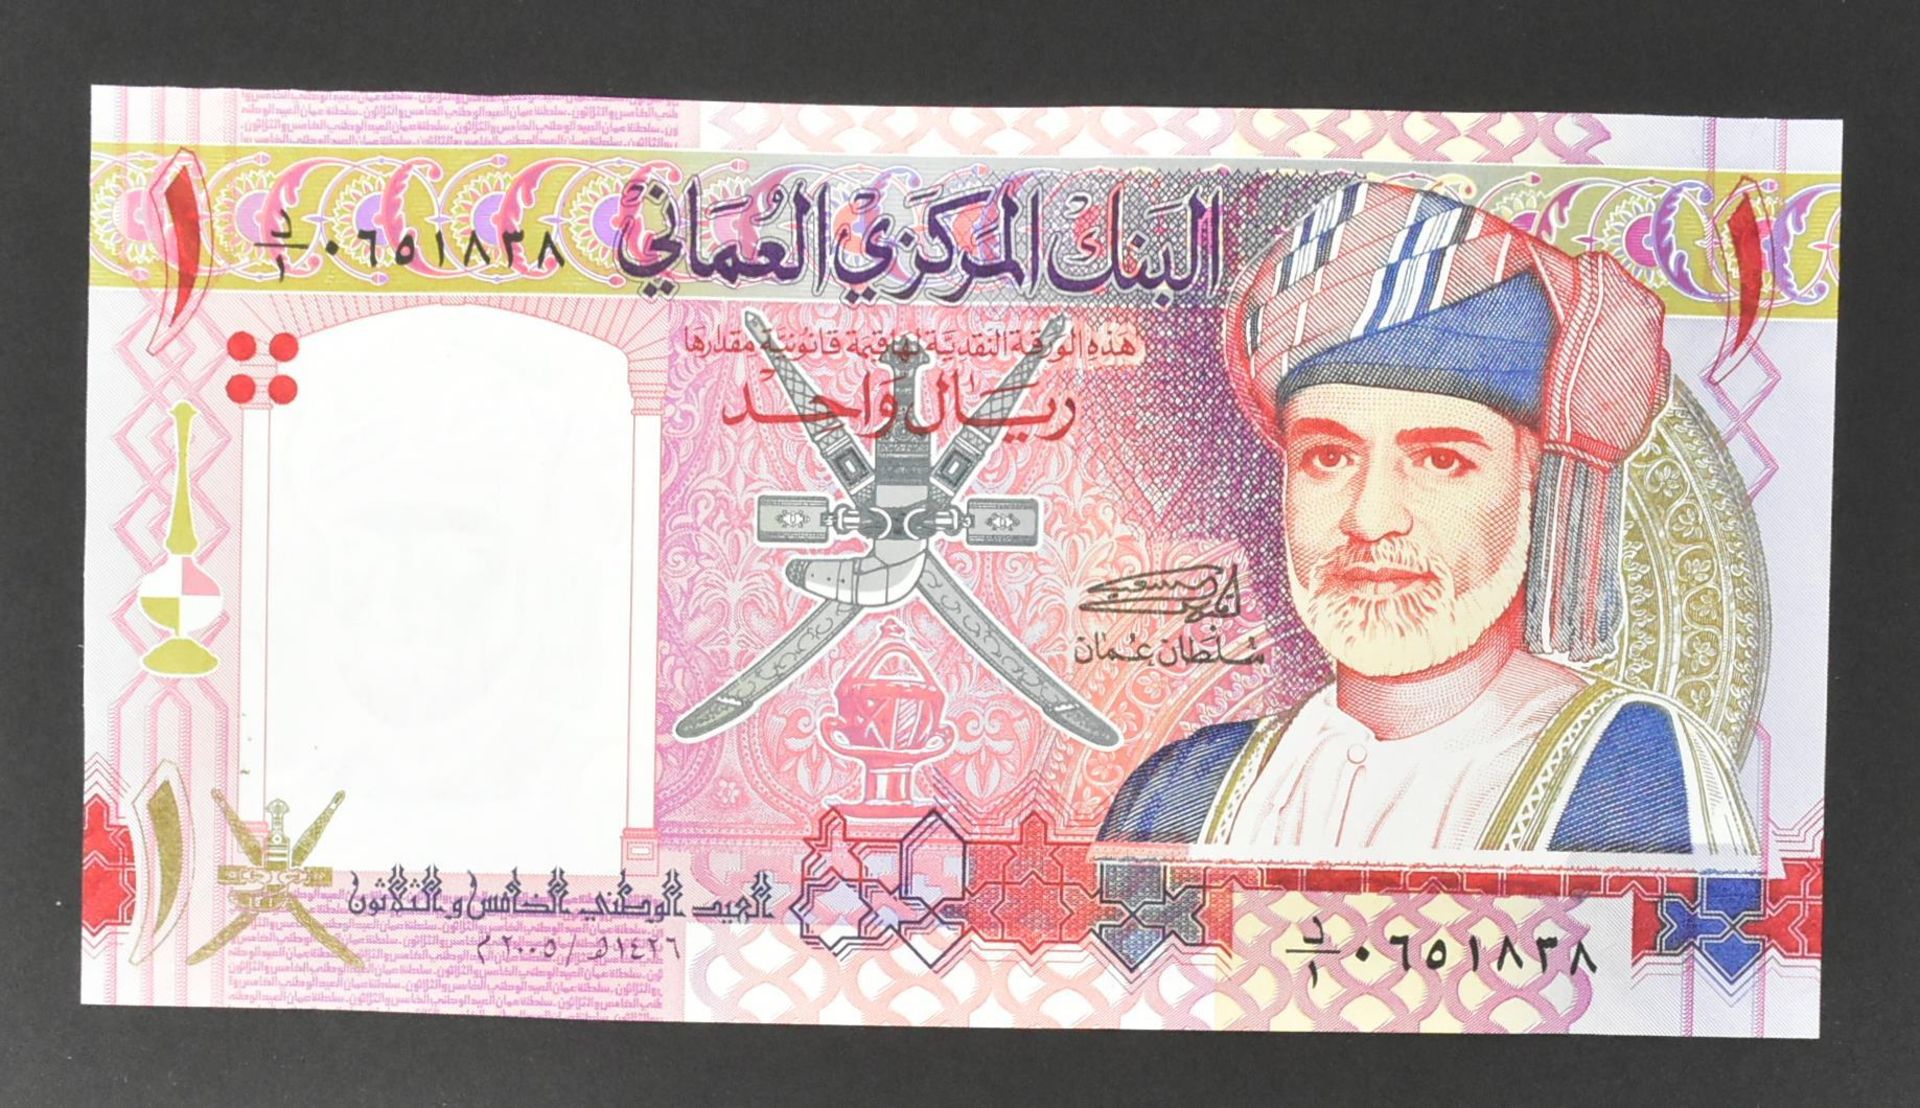 COLLECTION OF INTERNATIONAL UNCIRCULATED BANK NOTES - OMAN - Image 11 of 51